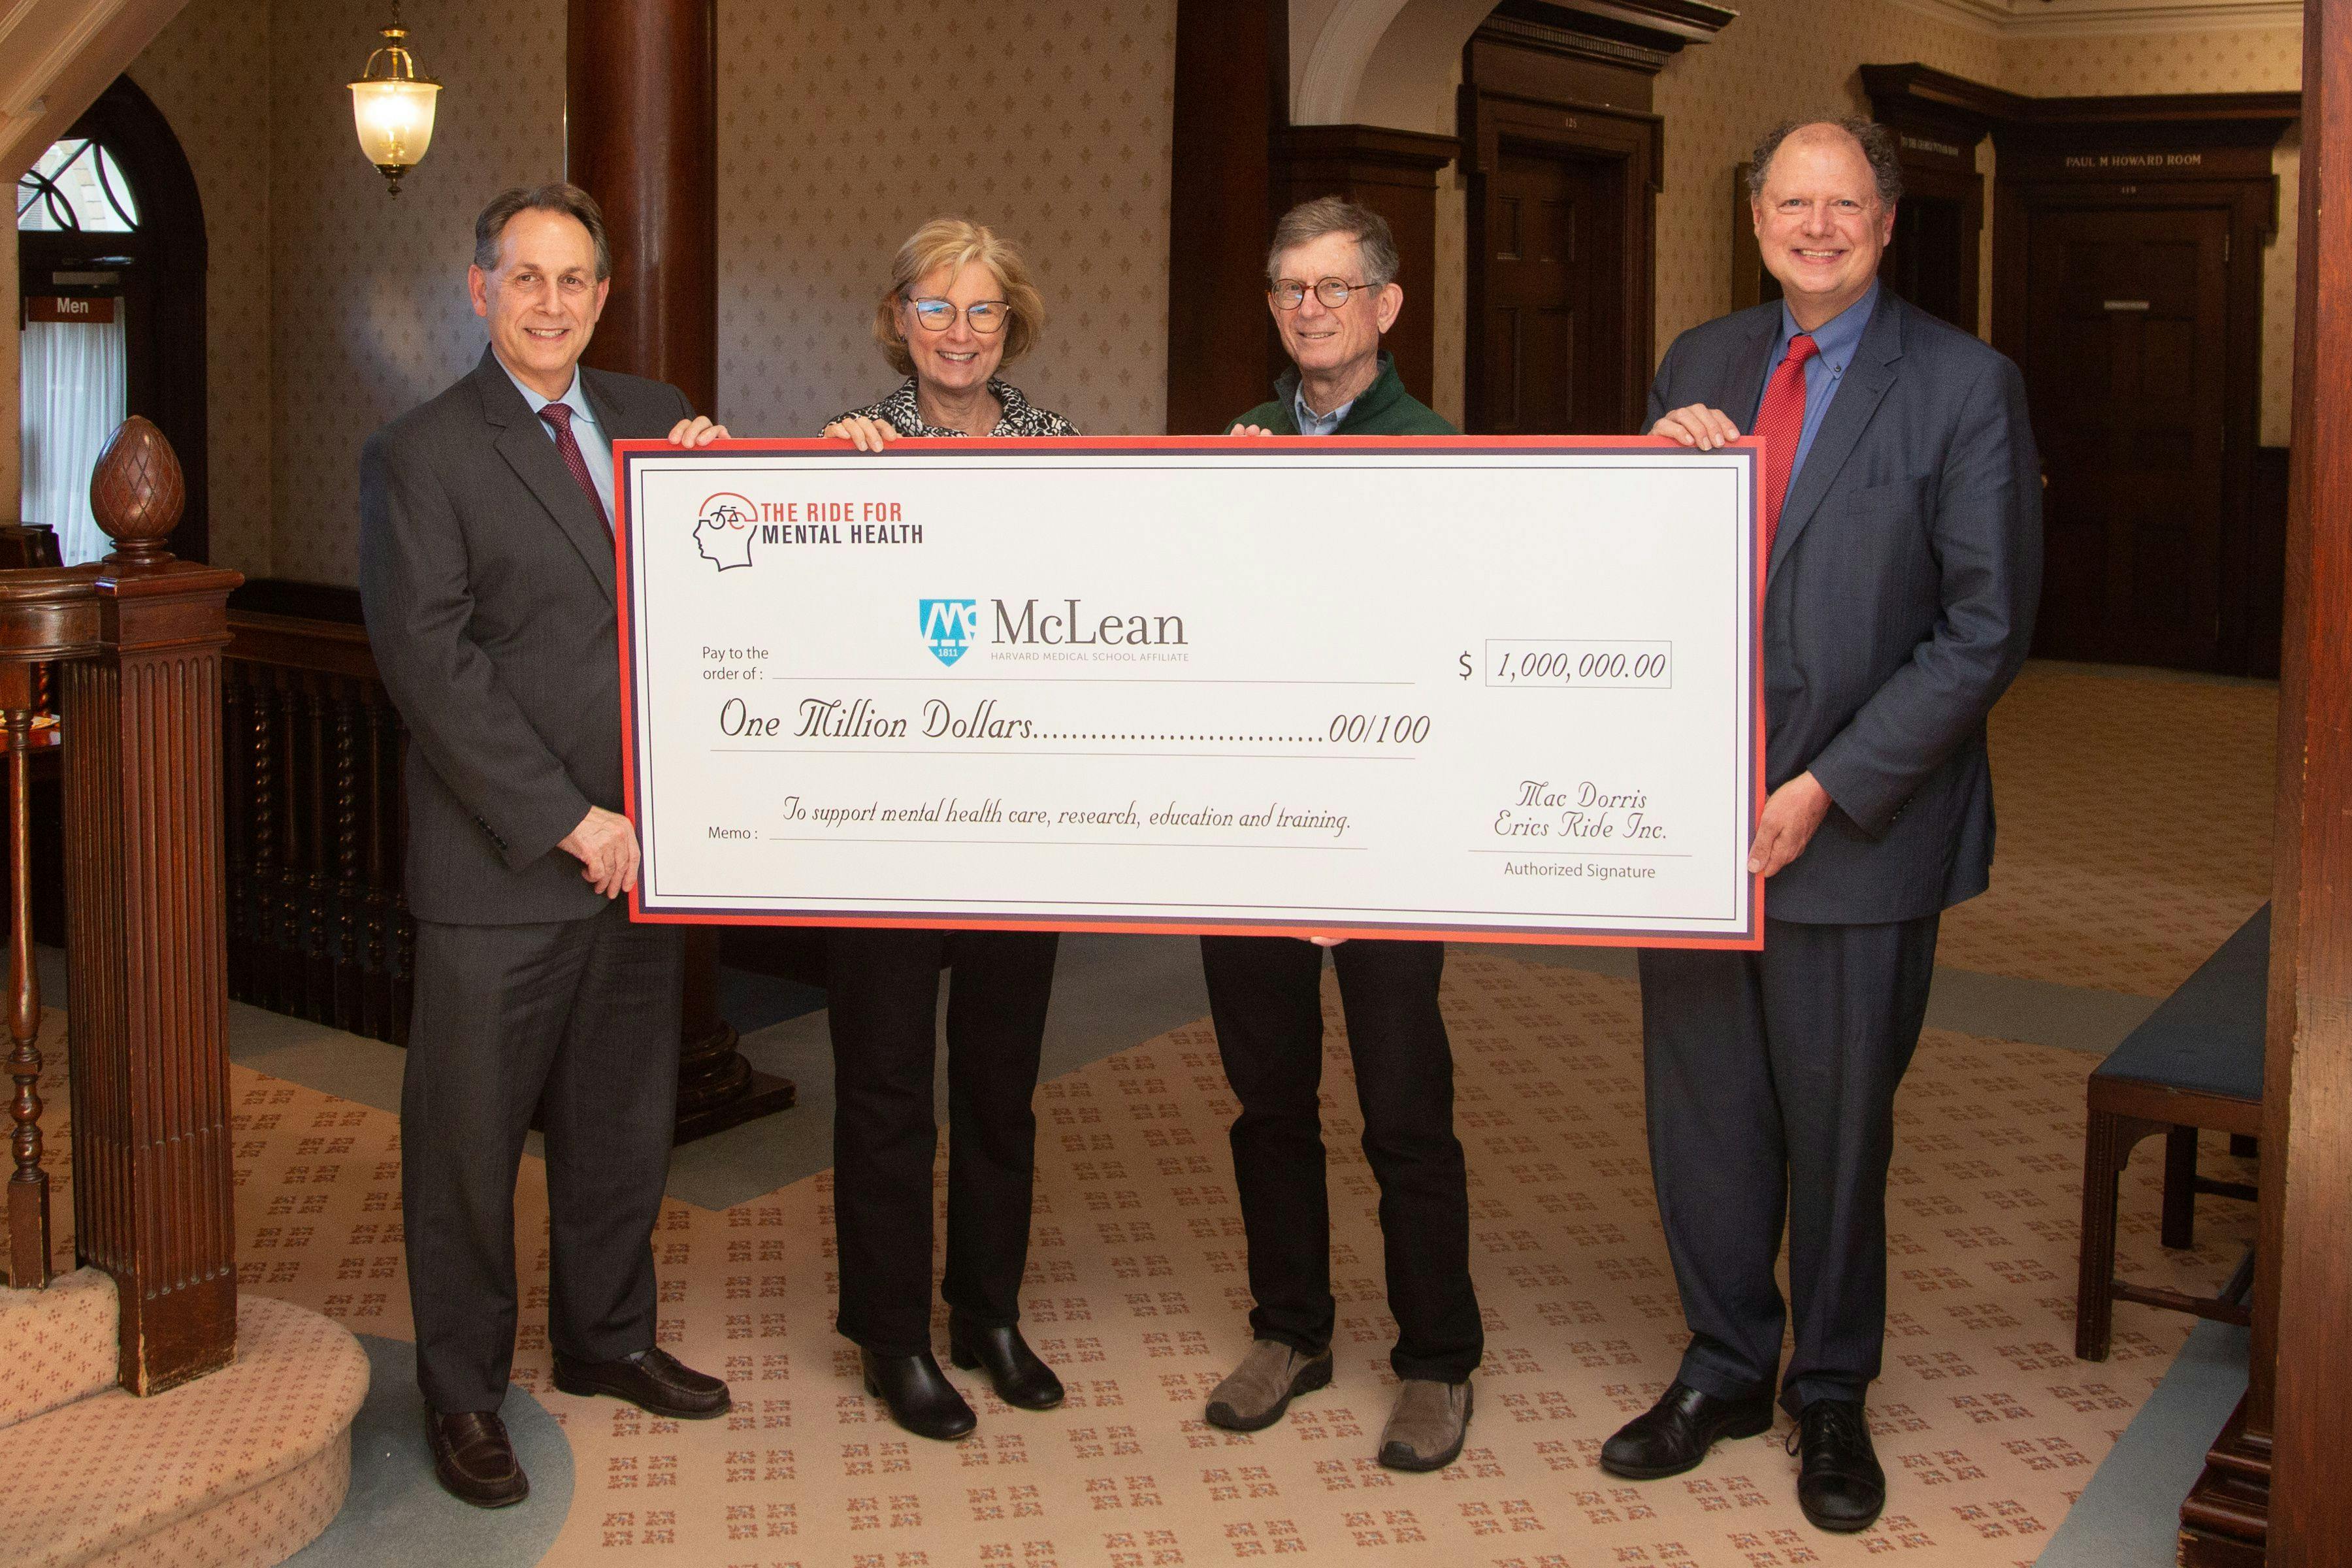 The Ride for Mental Health founder Mac Dorris and his wife, Ginny Dorris, with representatives of McLean Hospital holding a check recognizing $1 million in total contributions to McLean since 2017. Photo courtesy of the Ride for Mental Health.